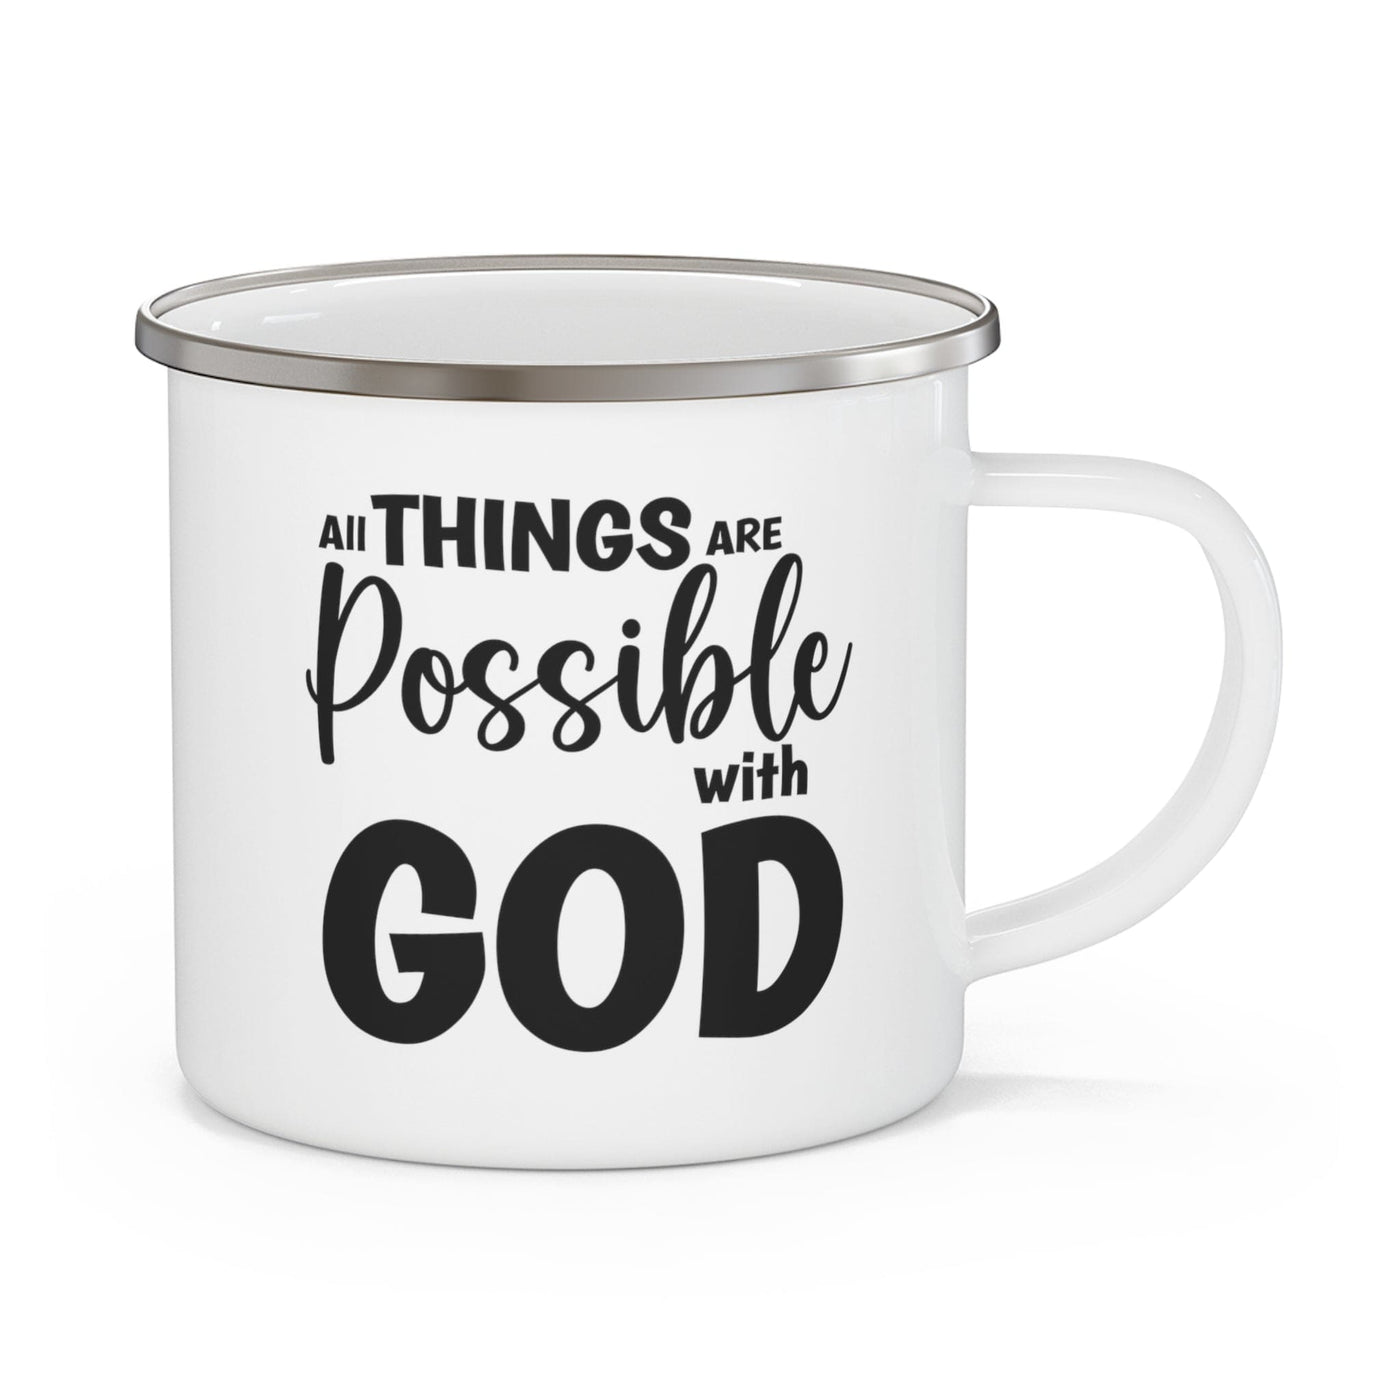 Enamel Camping Mug All Things Are Possible With God - Black - Decorative